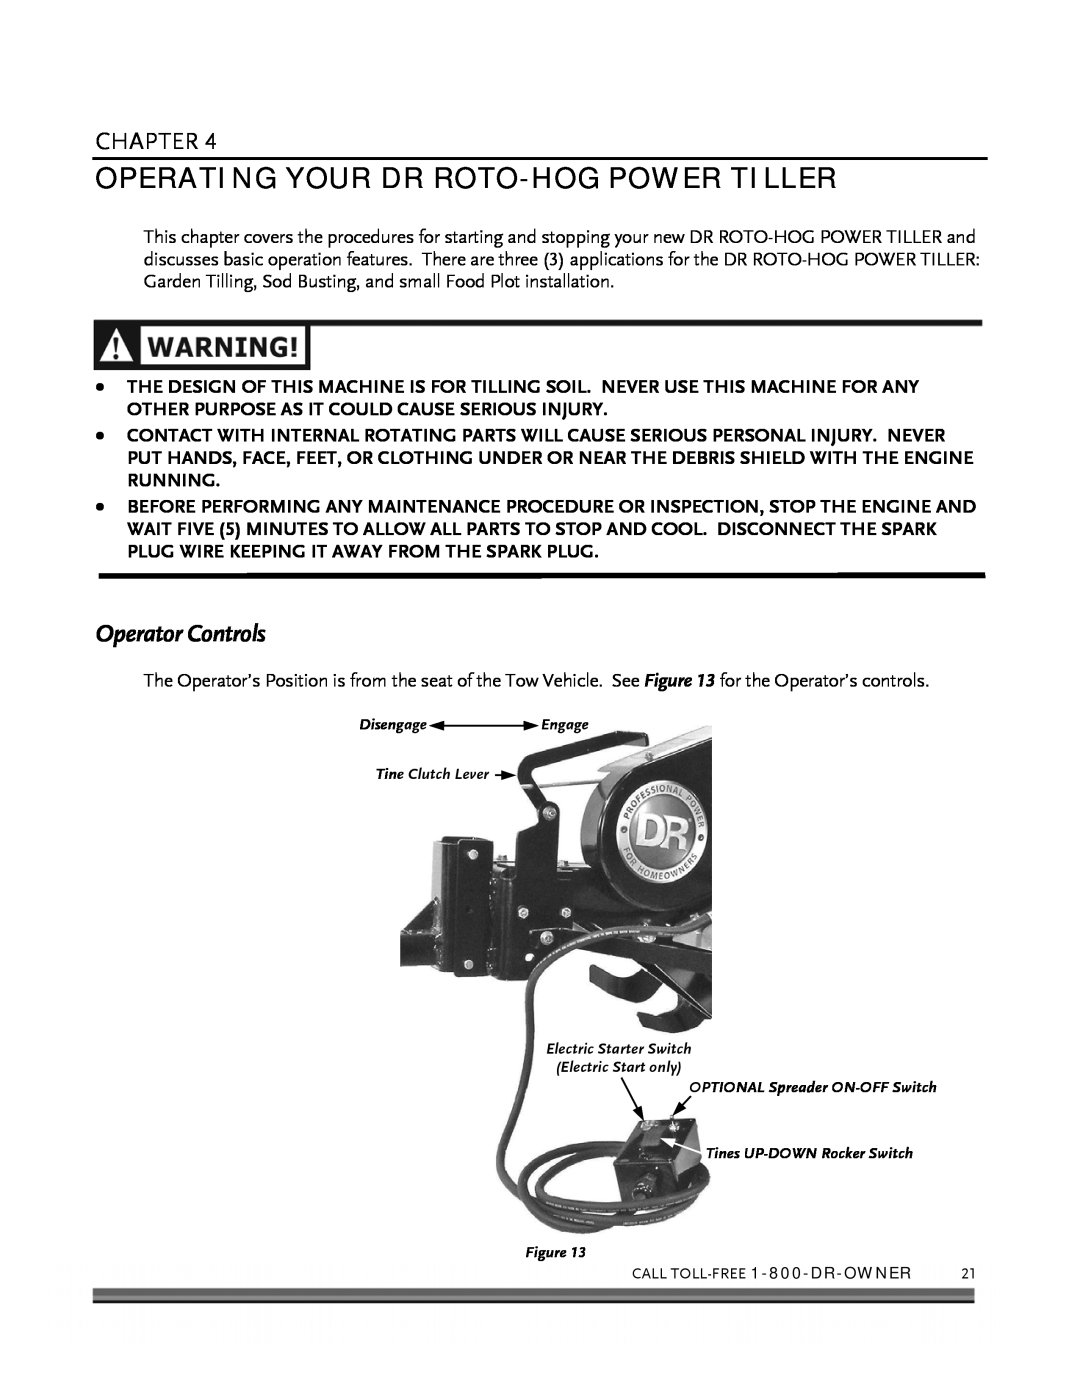 Country Home Products ROTO-HOGTM manual Operating Your Dr Roto-Hogpower Tiller, Operator Controls, Chapter 